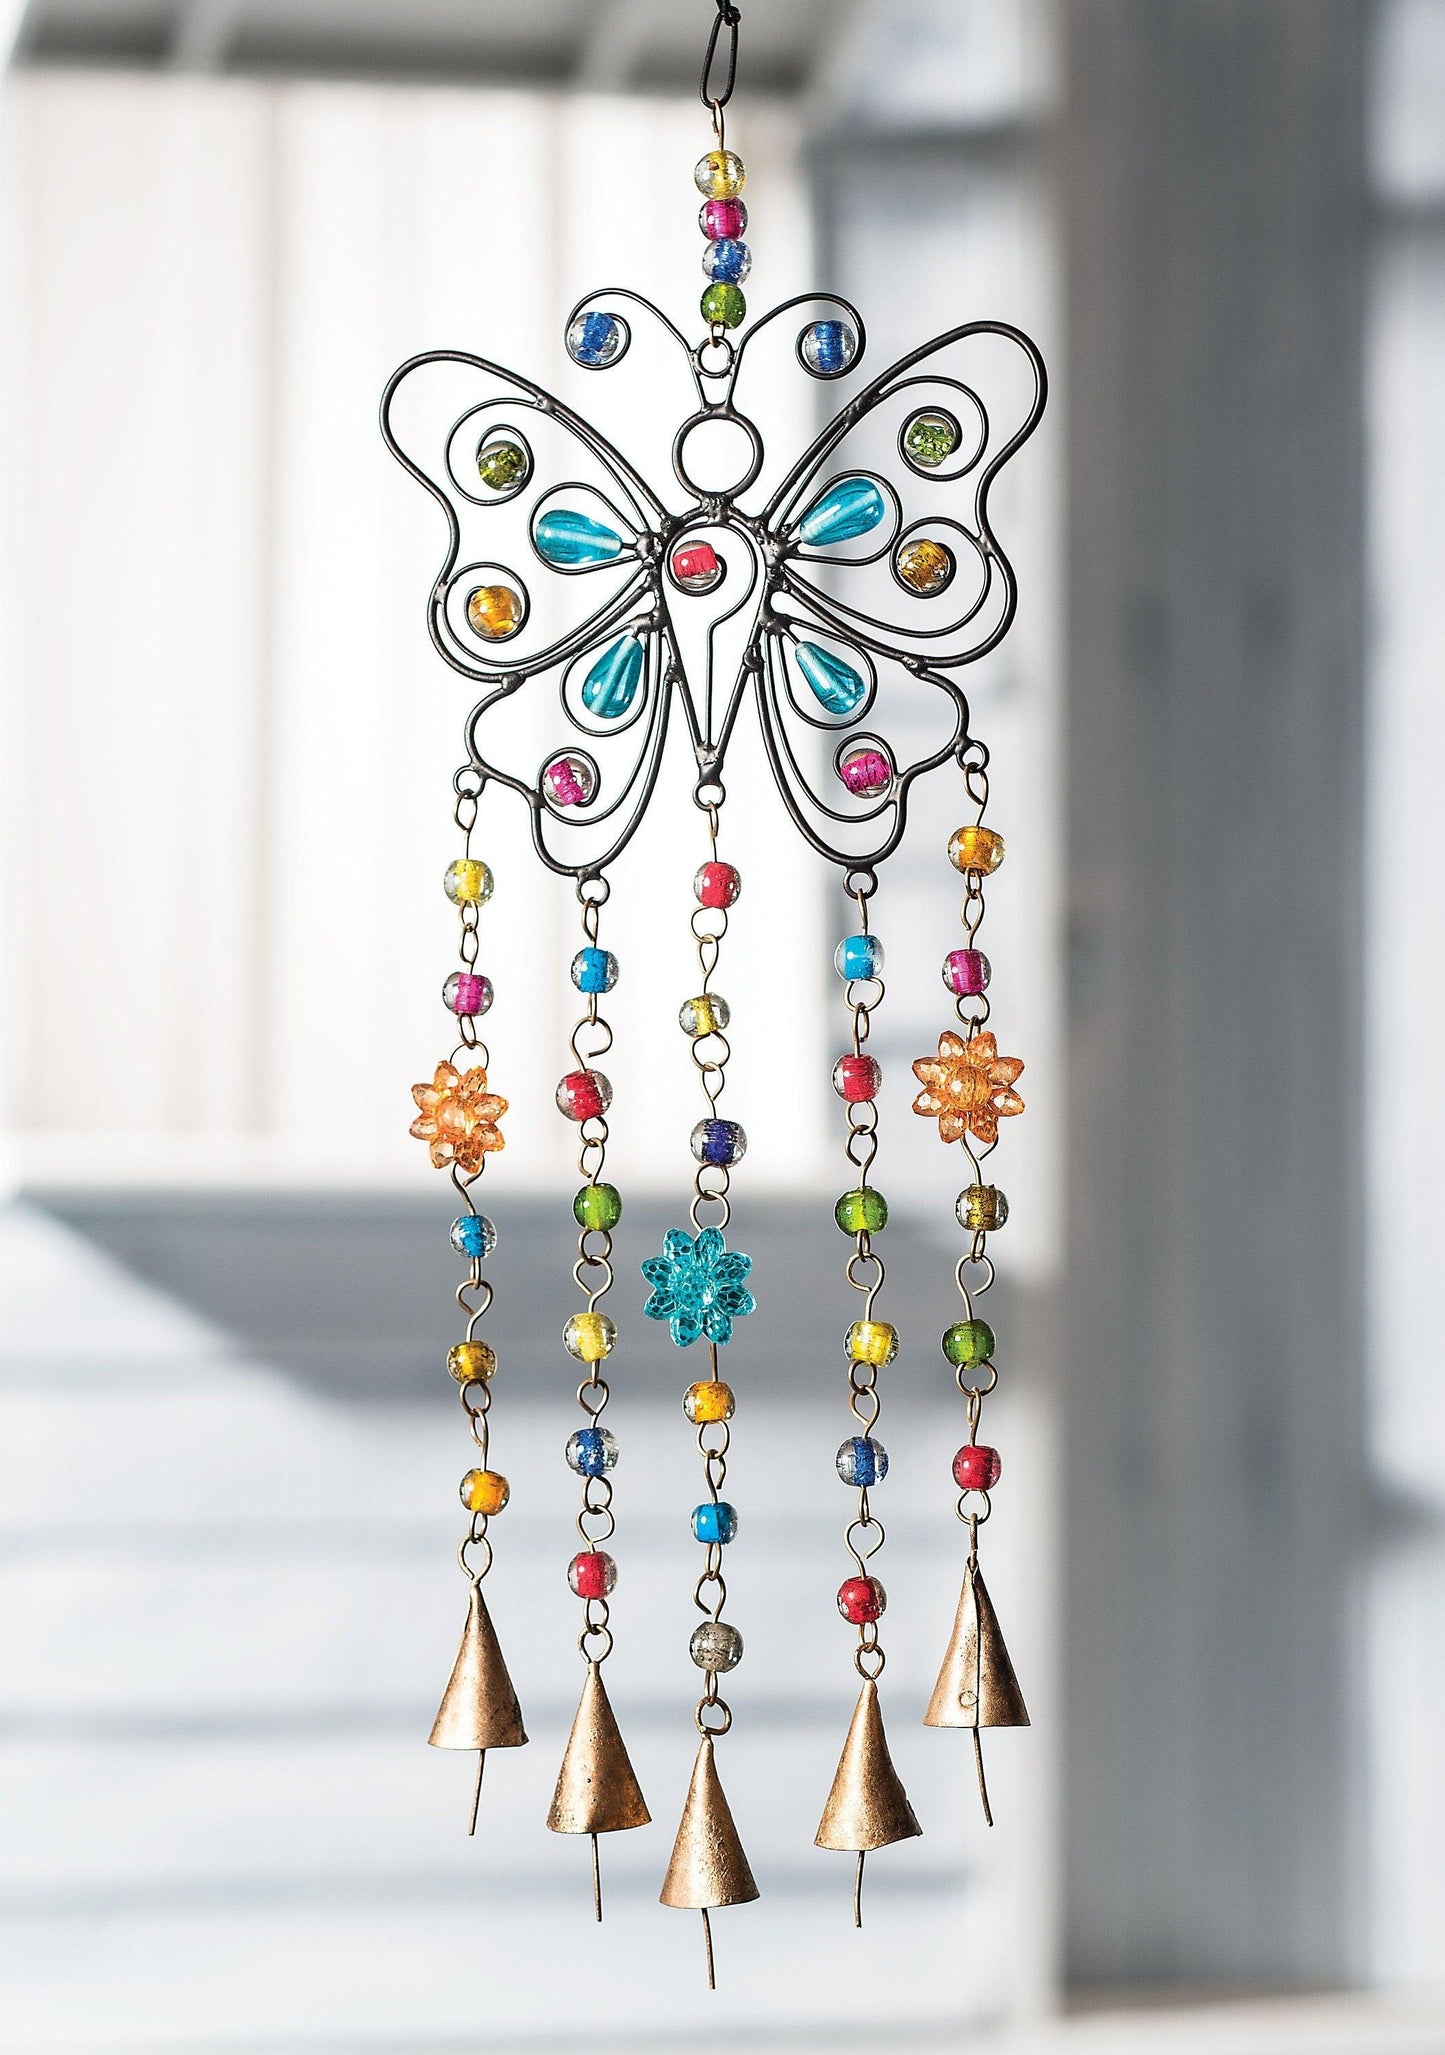 Unwind in your garden oasis with our handcrafted Butterfly Wind Chime (16.5"). Soothing sounds & beautiful design create a peaceful & calming atmosphere. Perfect for relaxation, meditation & gifts